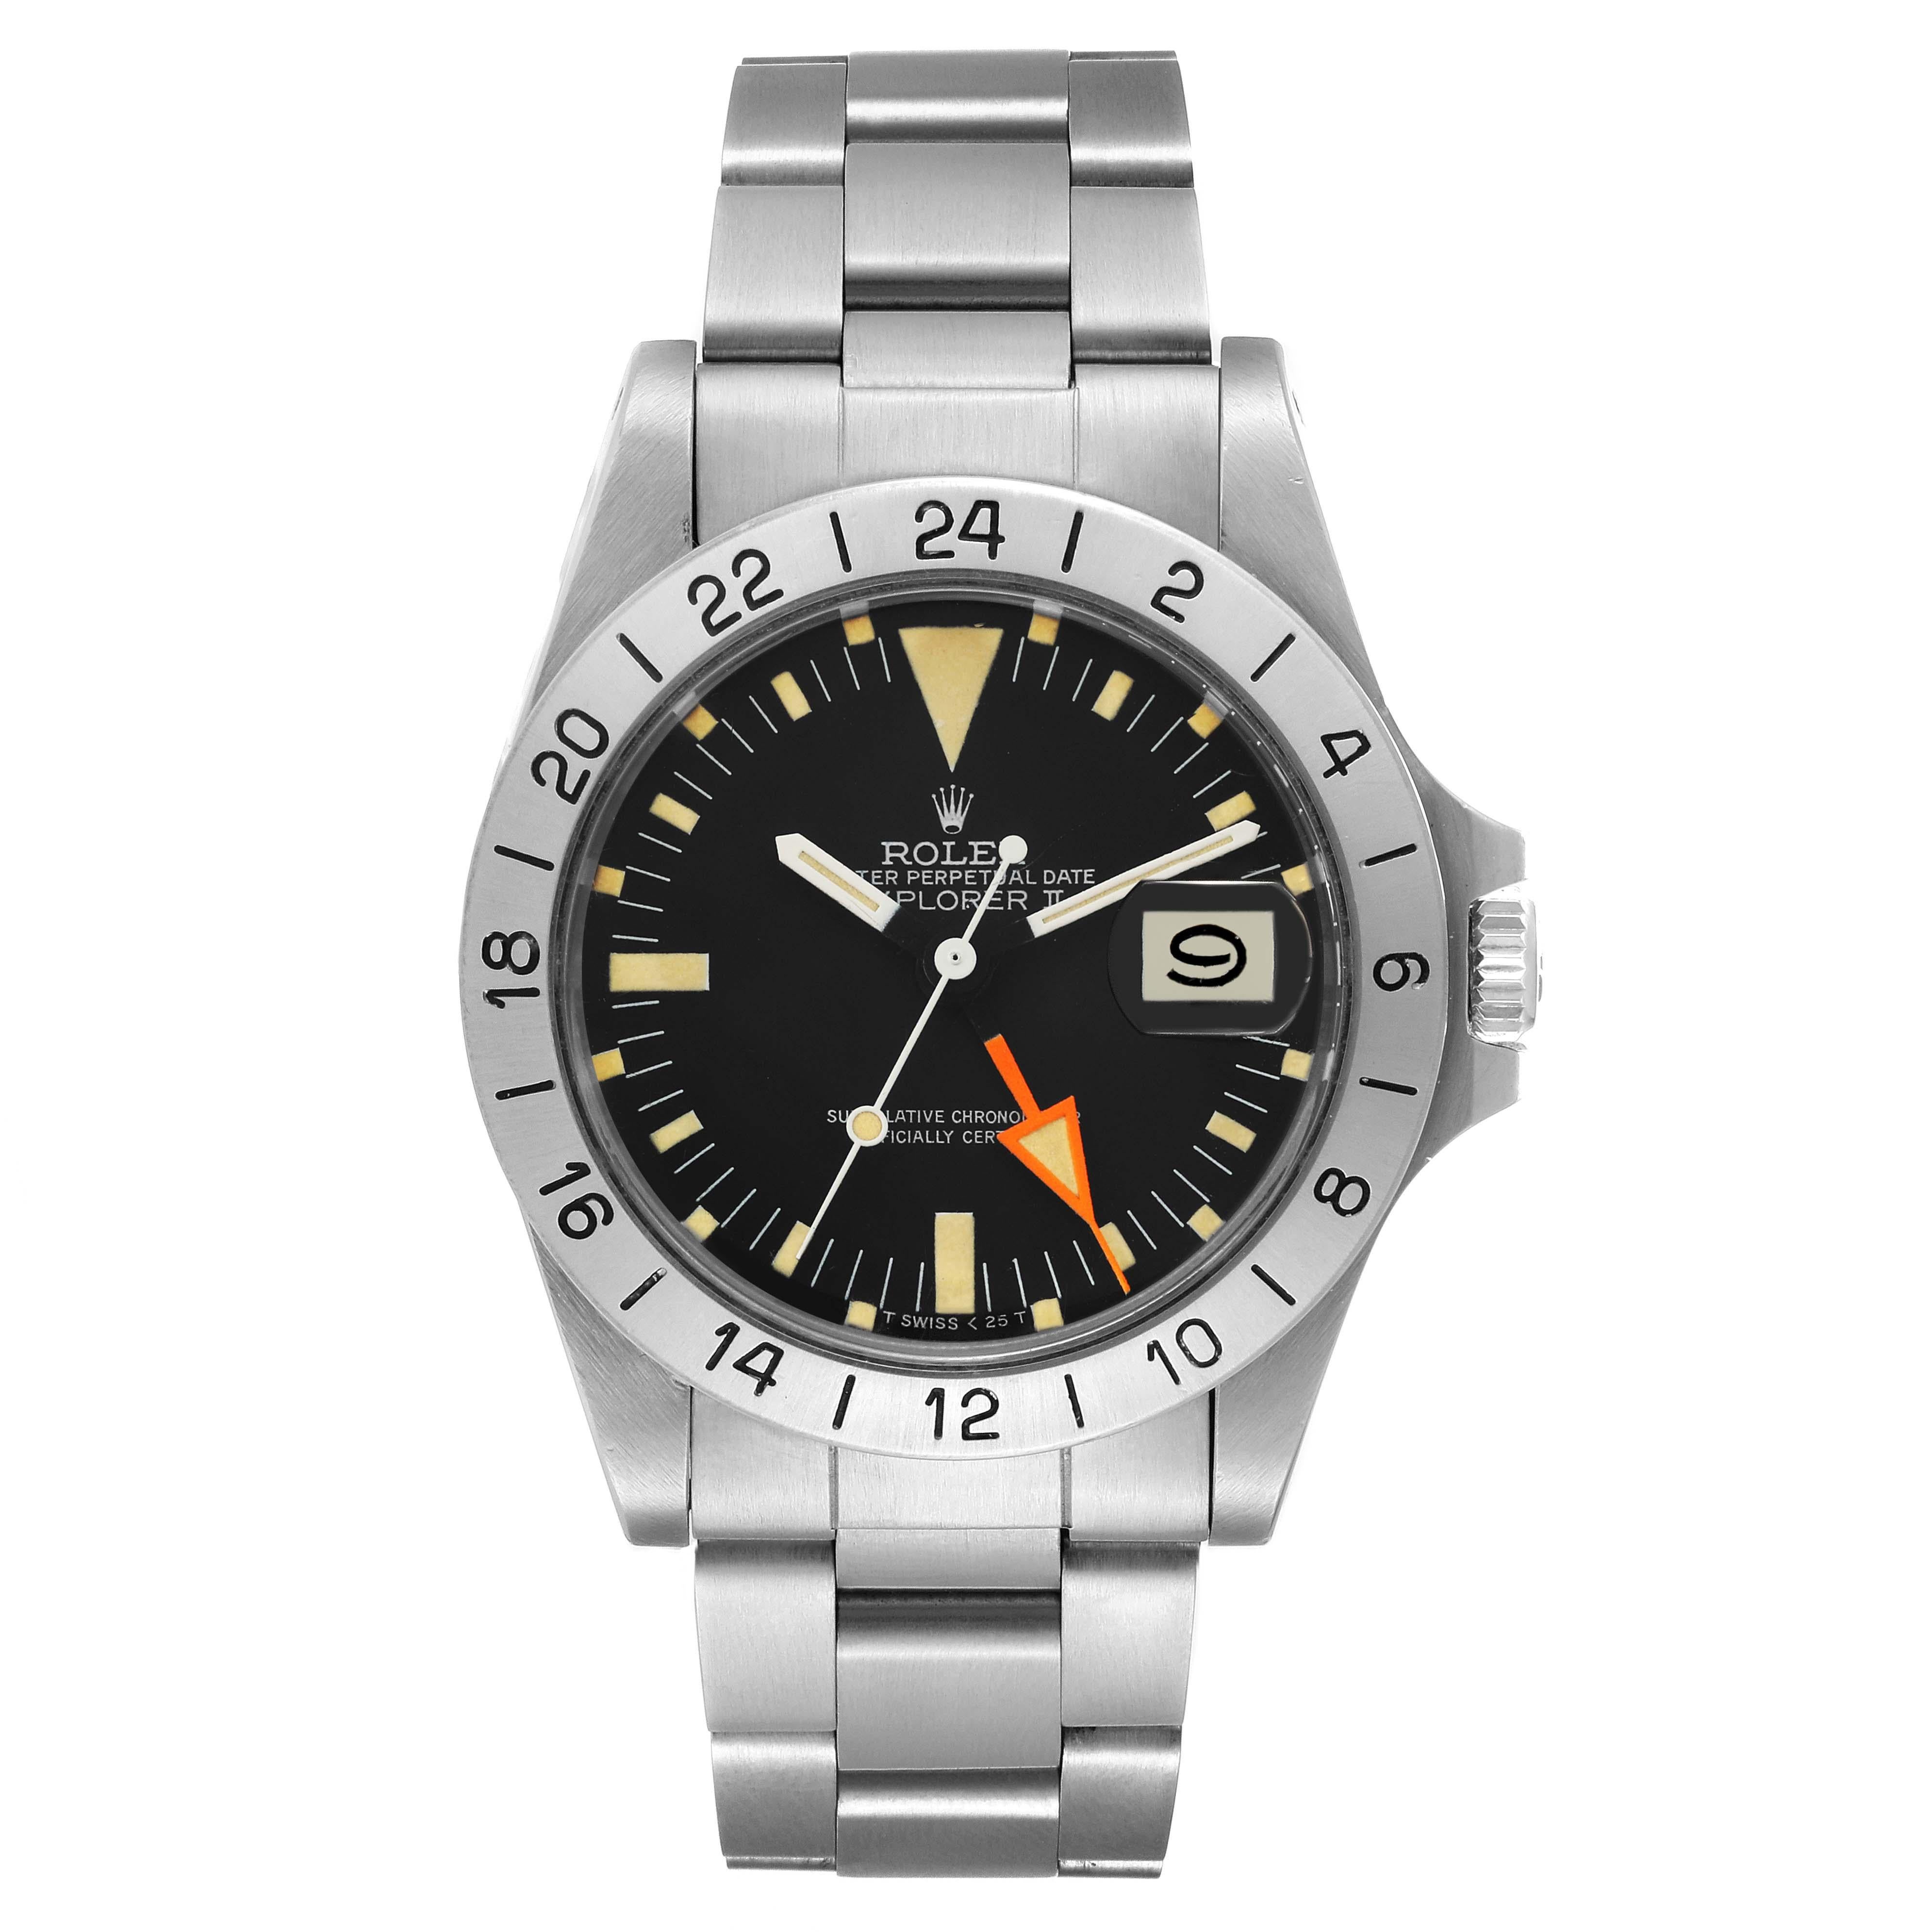 Rolex Explorer II Steve Mcqueen Vintage Steel Mens Watch 1655 Box Papers. Officially certified chronometer self-winding movement. Straight-line lever escapement, monometallic balance adjusted to 5 positions and temperature, shock absorber,